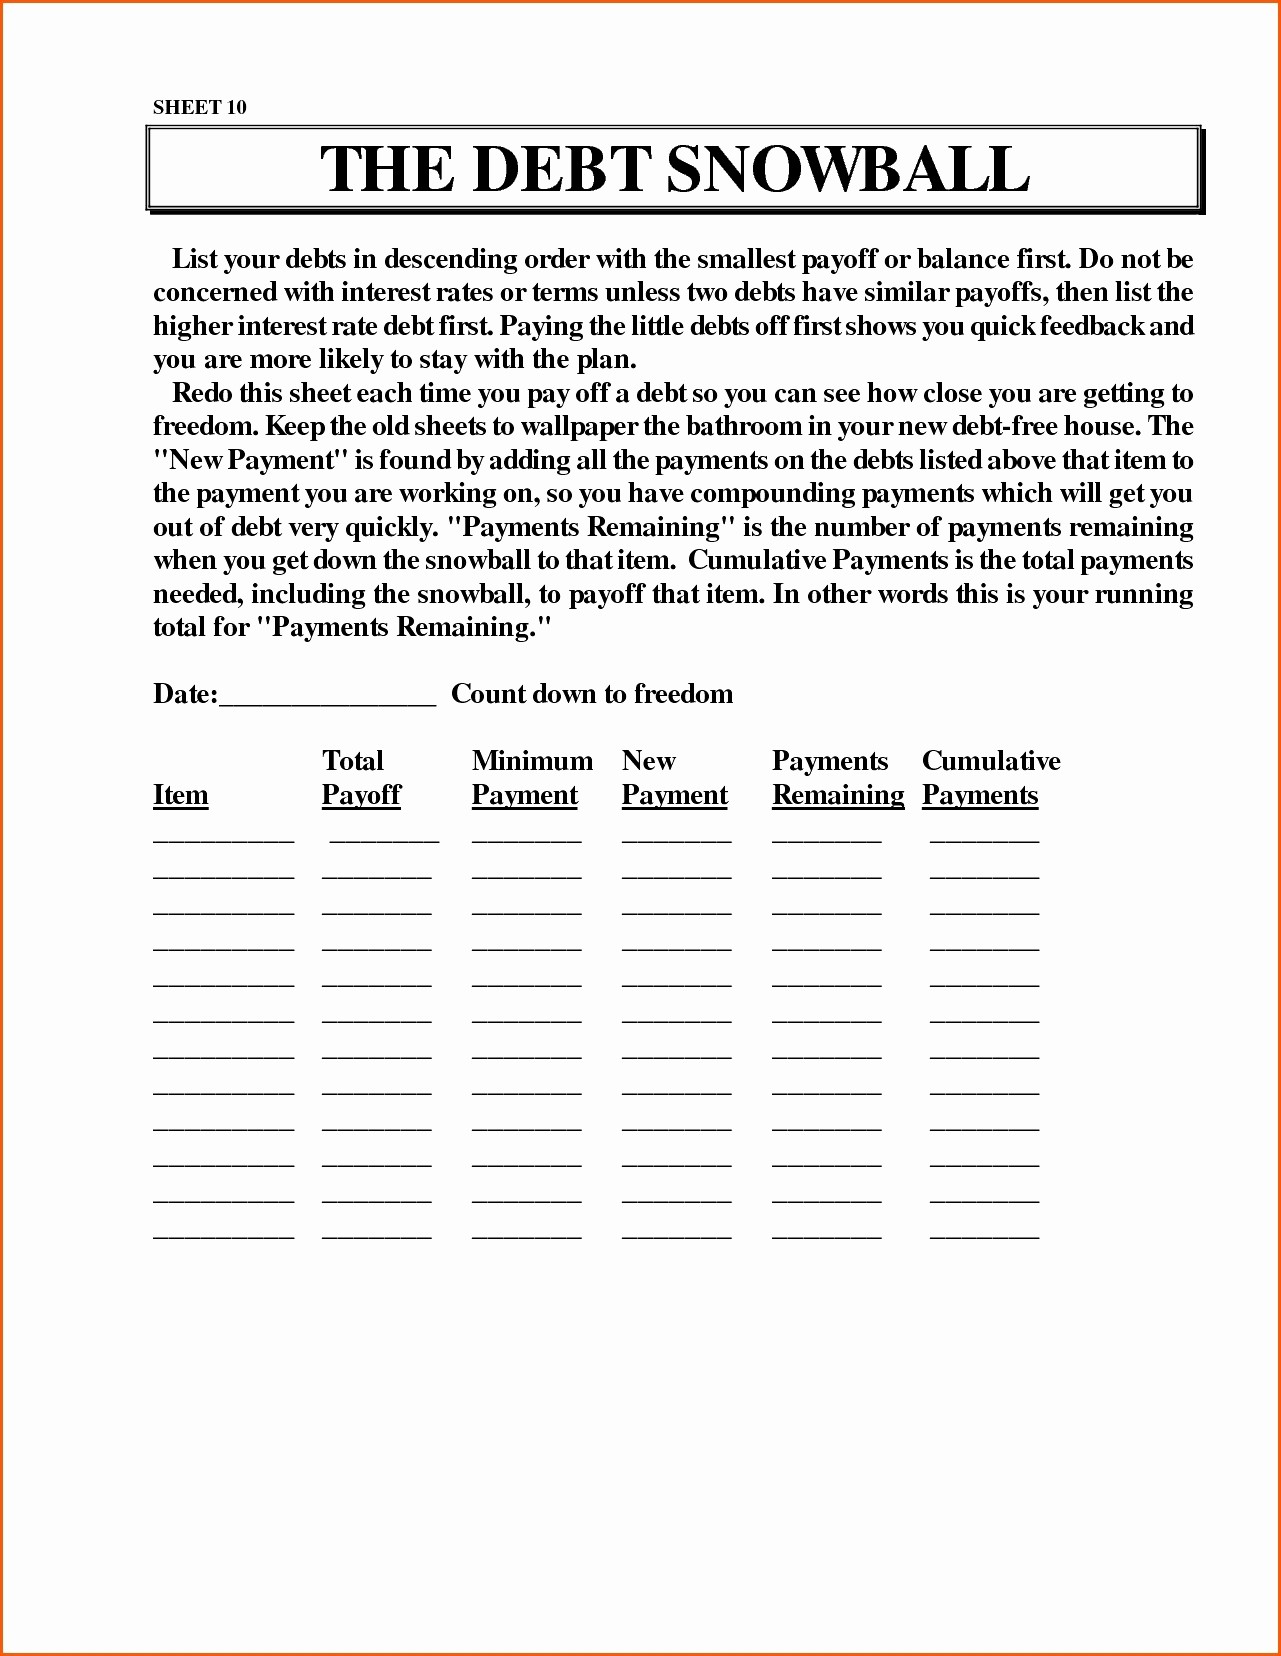 Fmla Intermittent Leave Tracking Form Lovely Document